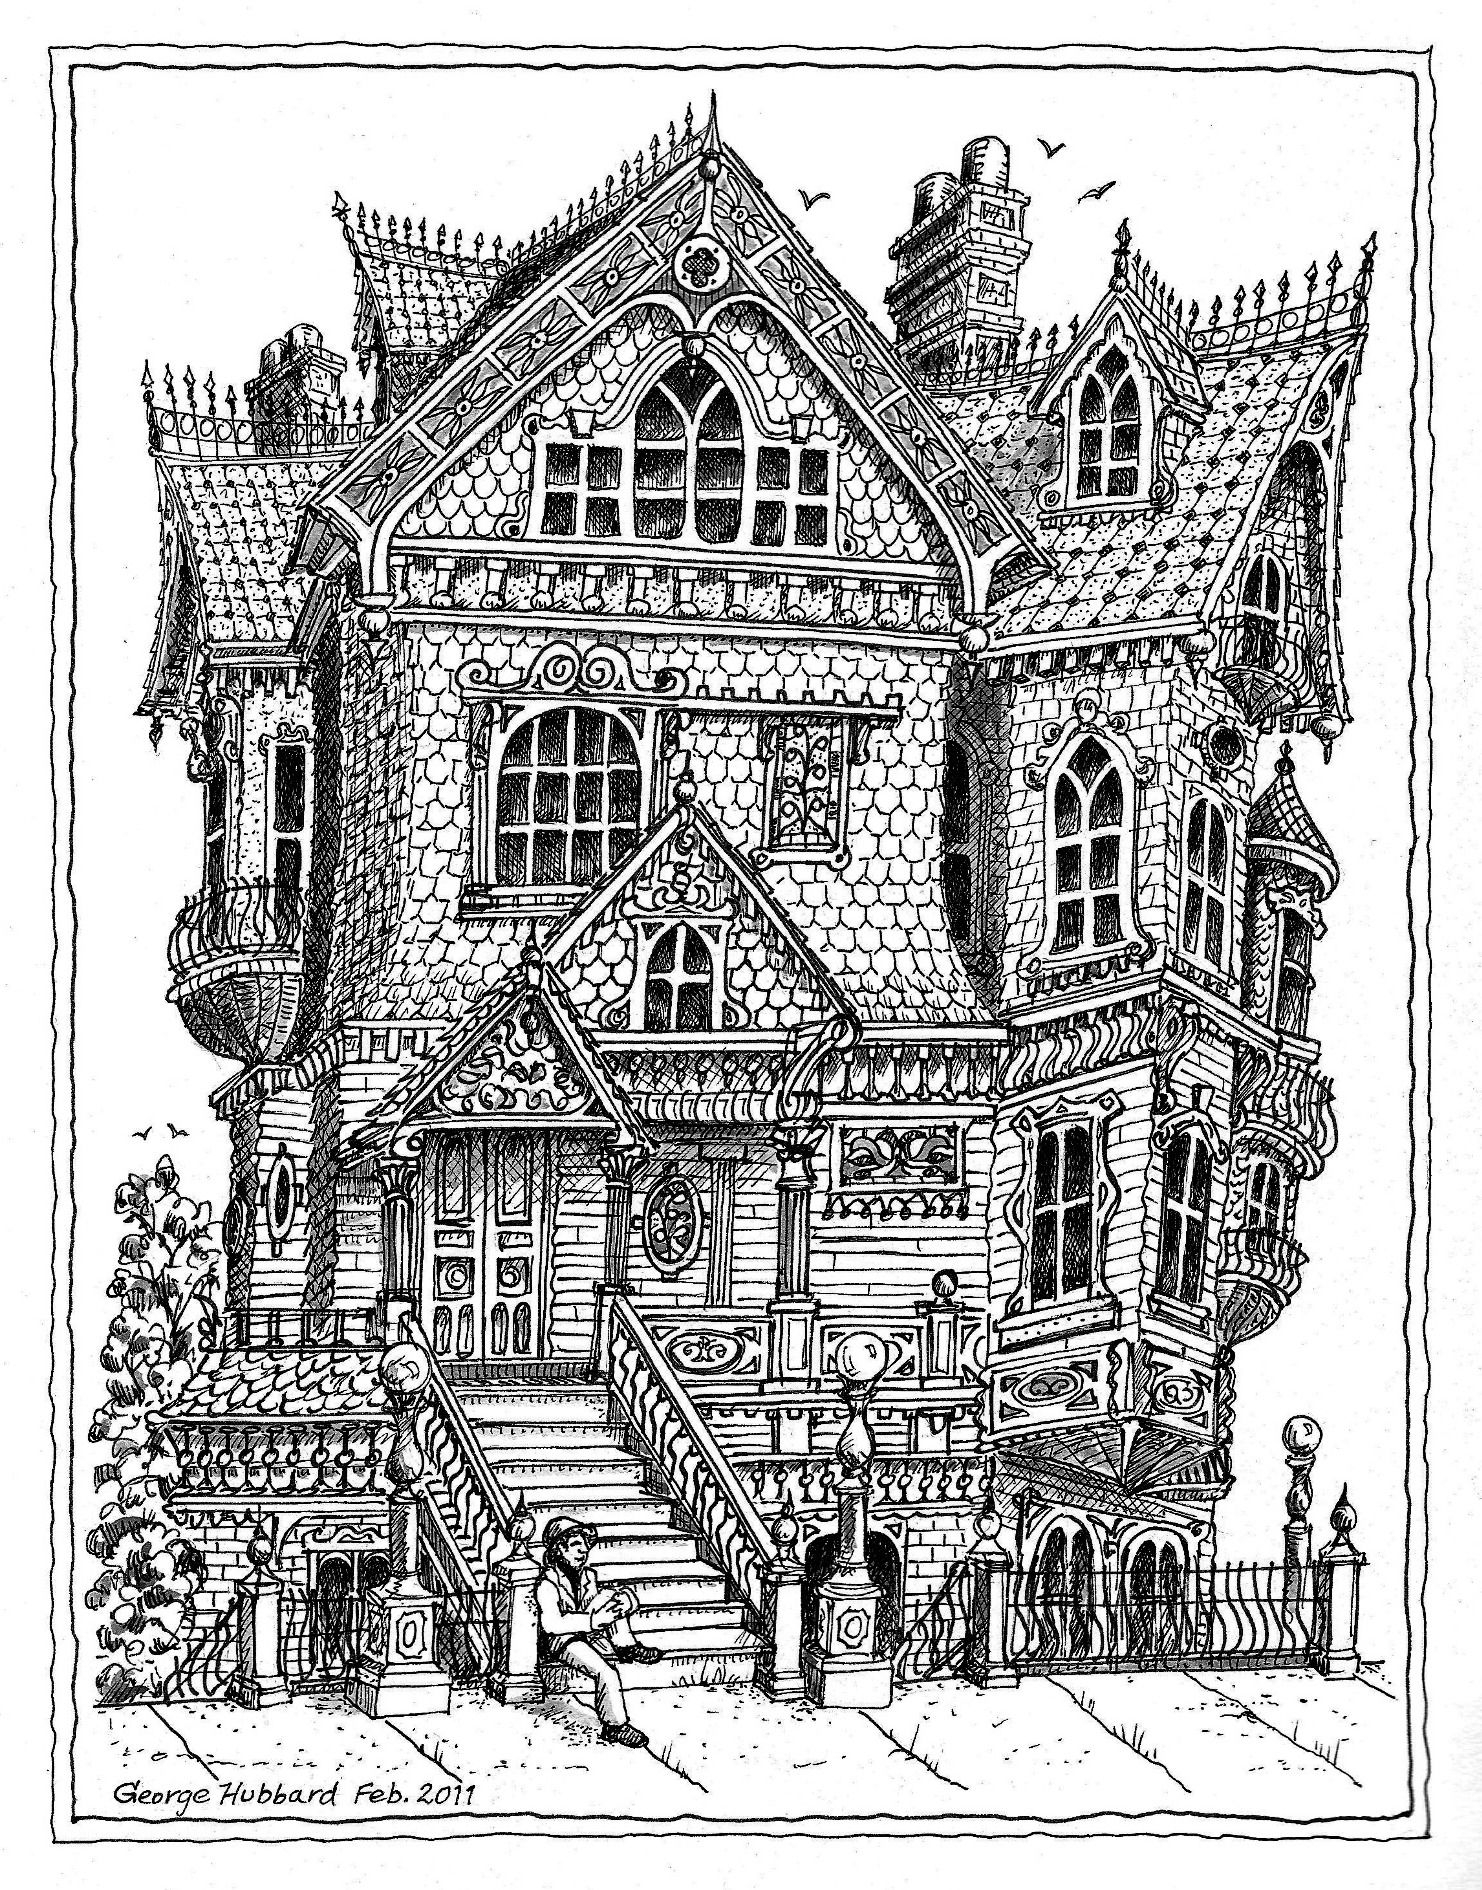 Giant Coloring Pages For Adults Coloring Pages Victorian House Adult Colouring Coloring Pages